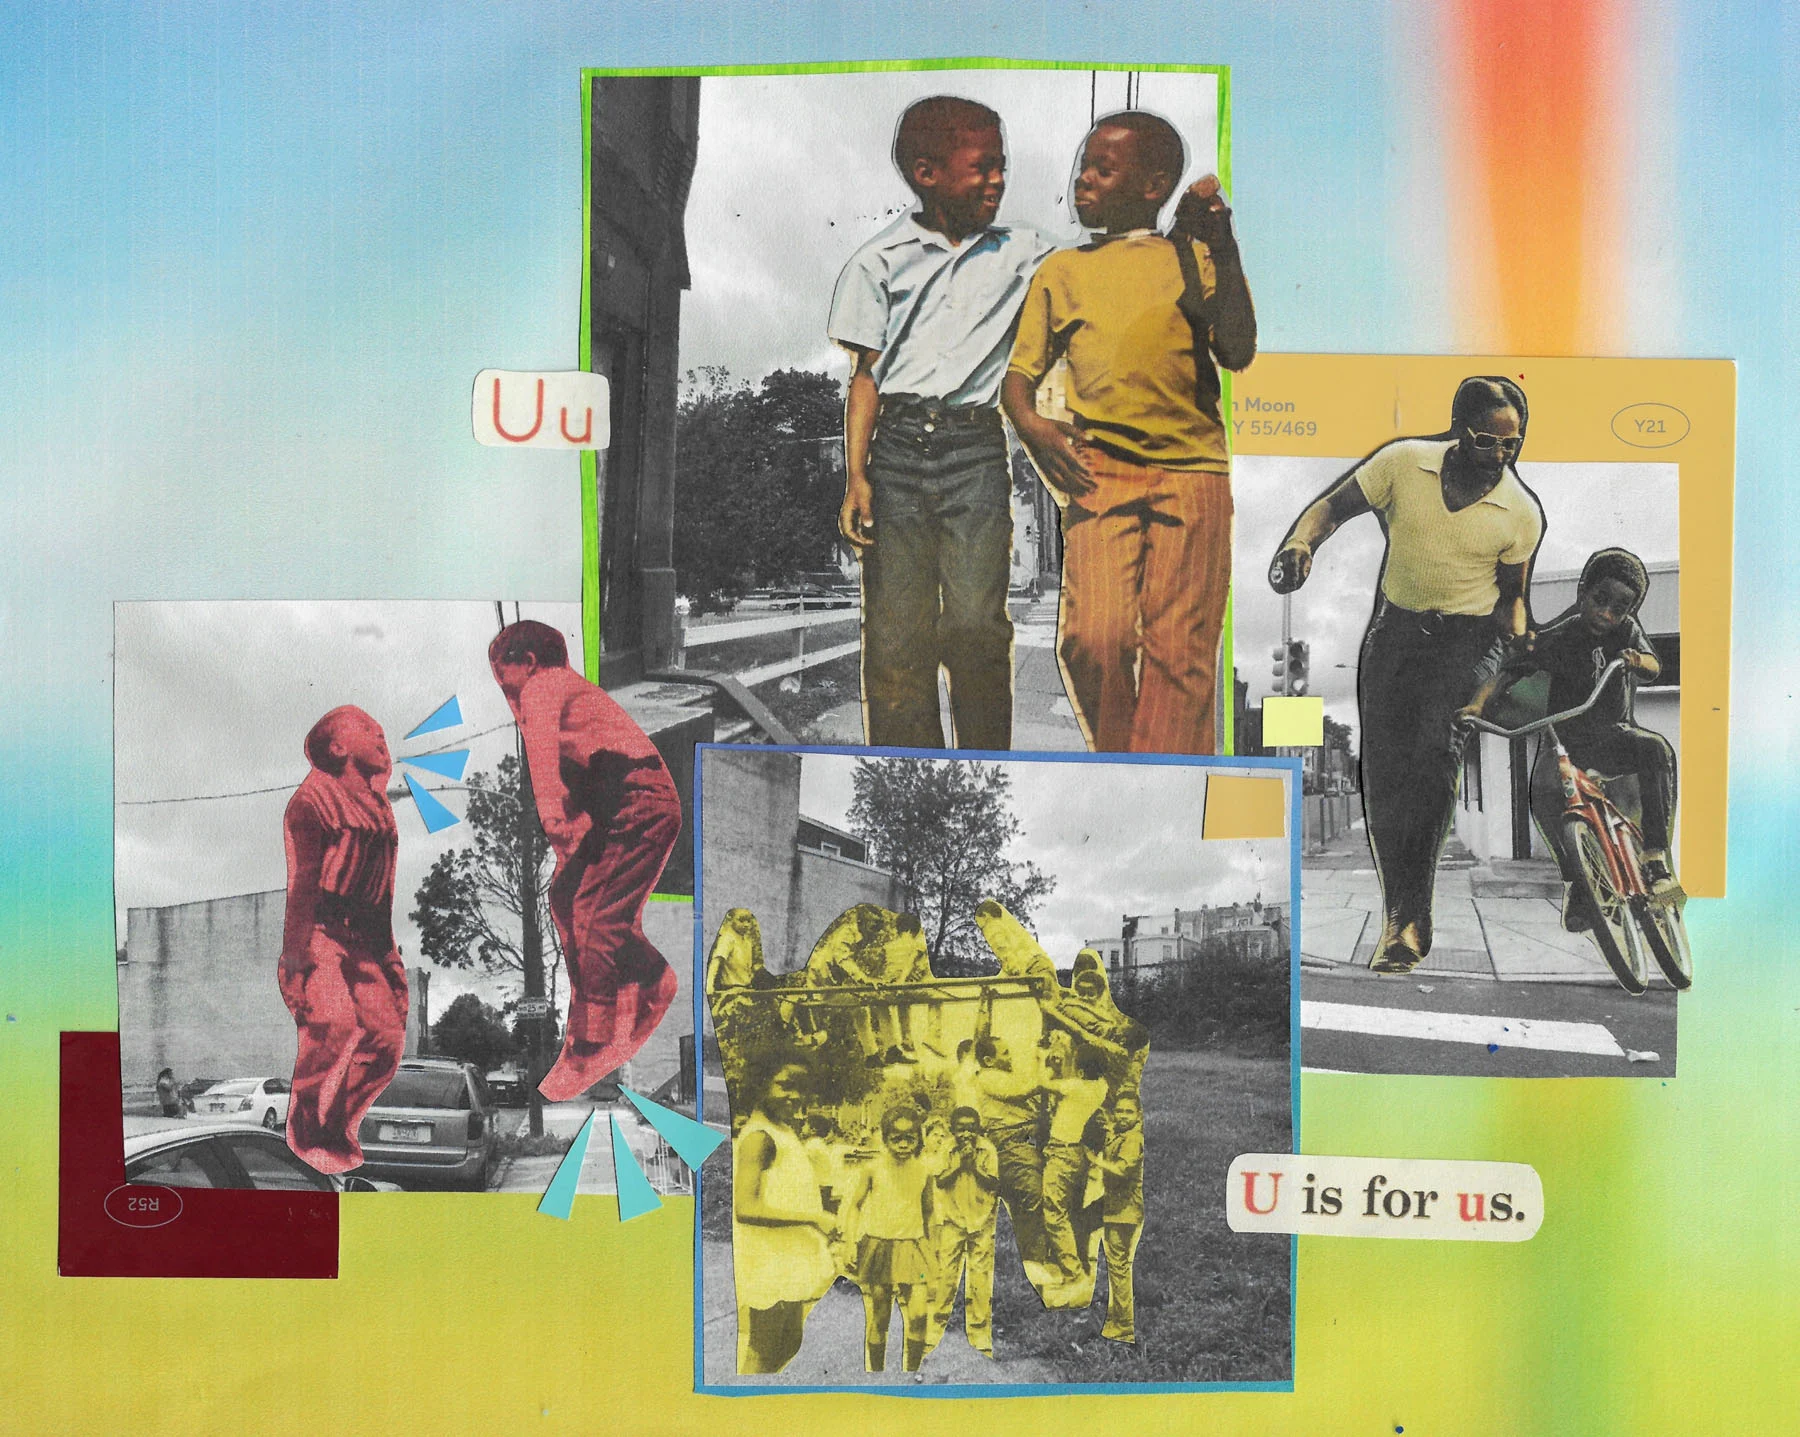 A collage with a gradient background of blue, green, white and orange. Black and white photos of the gentrified streets of Philidelphia as of 2021 fill the composition, and color photographs of Philadelphia in the 70s are layered on top of them. Text on the left and righthand side say “Uu, U is for us.”